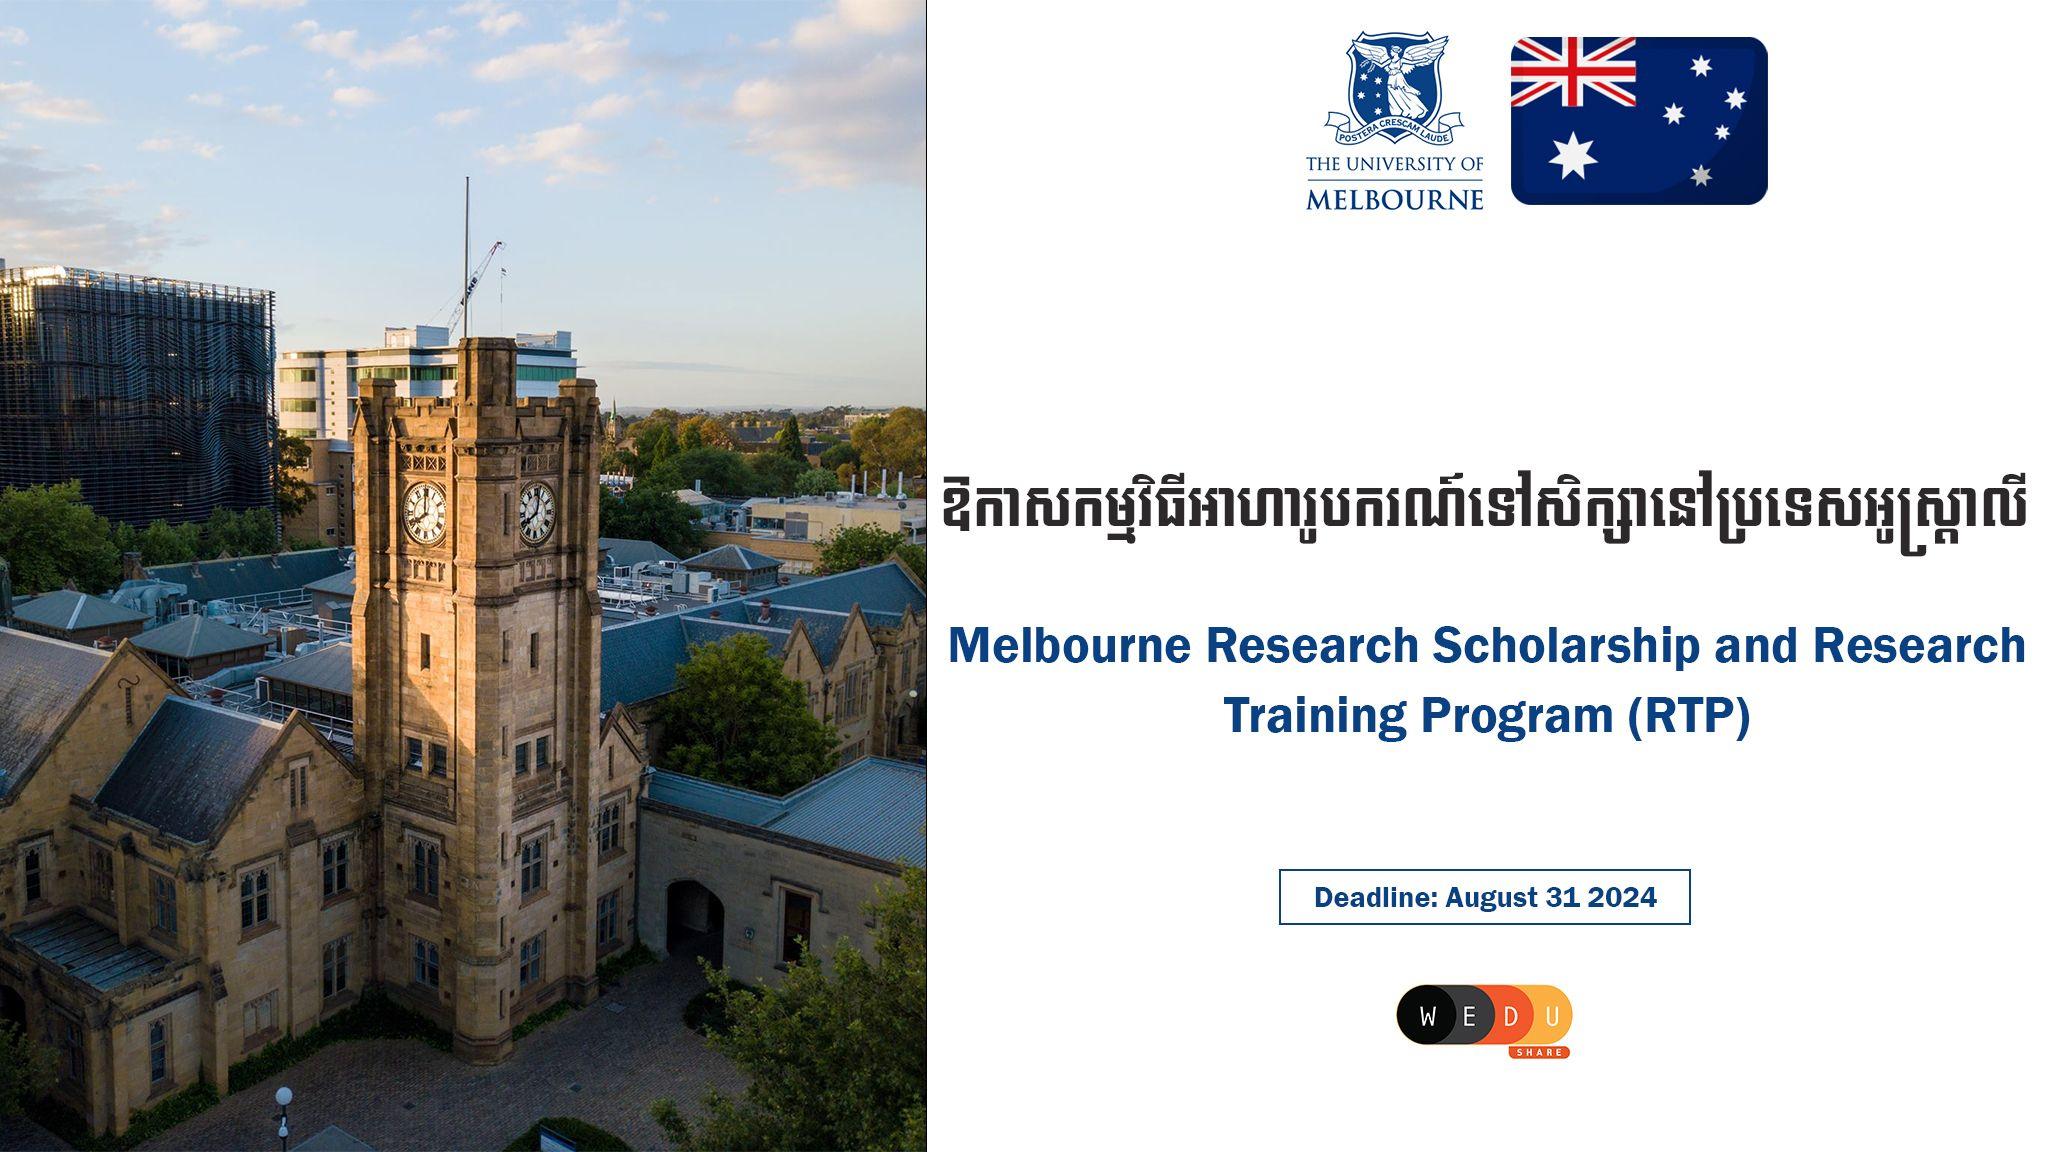 Melbourne Research Scholarship and Research Training Program (RTP)